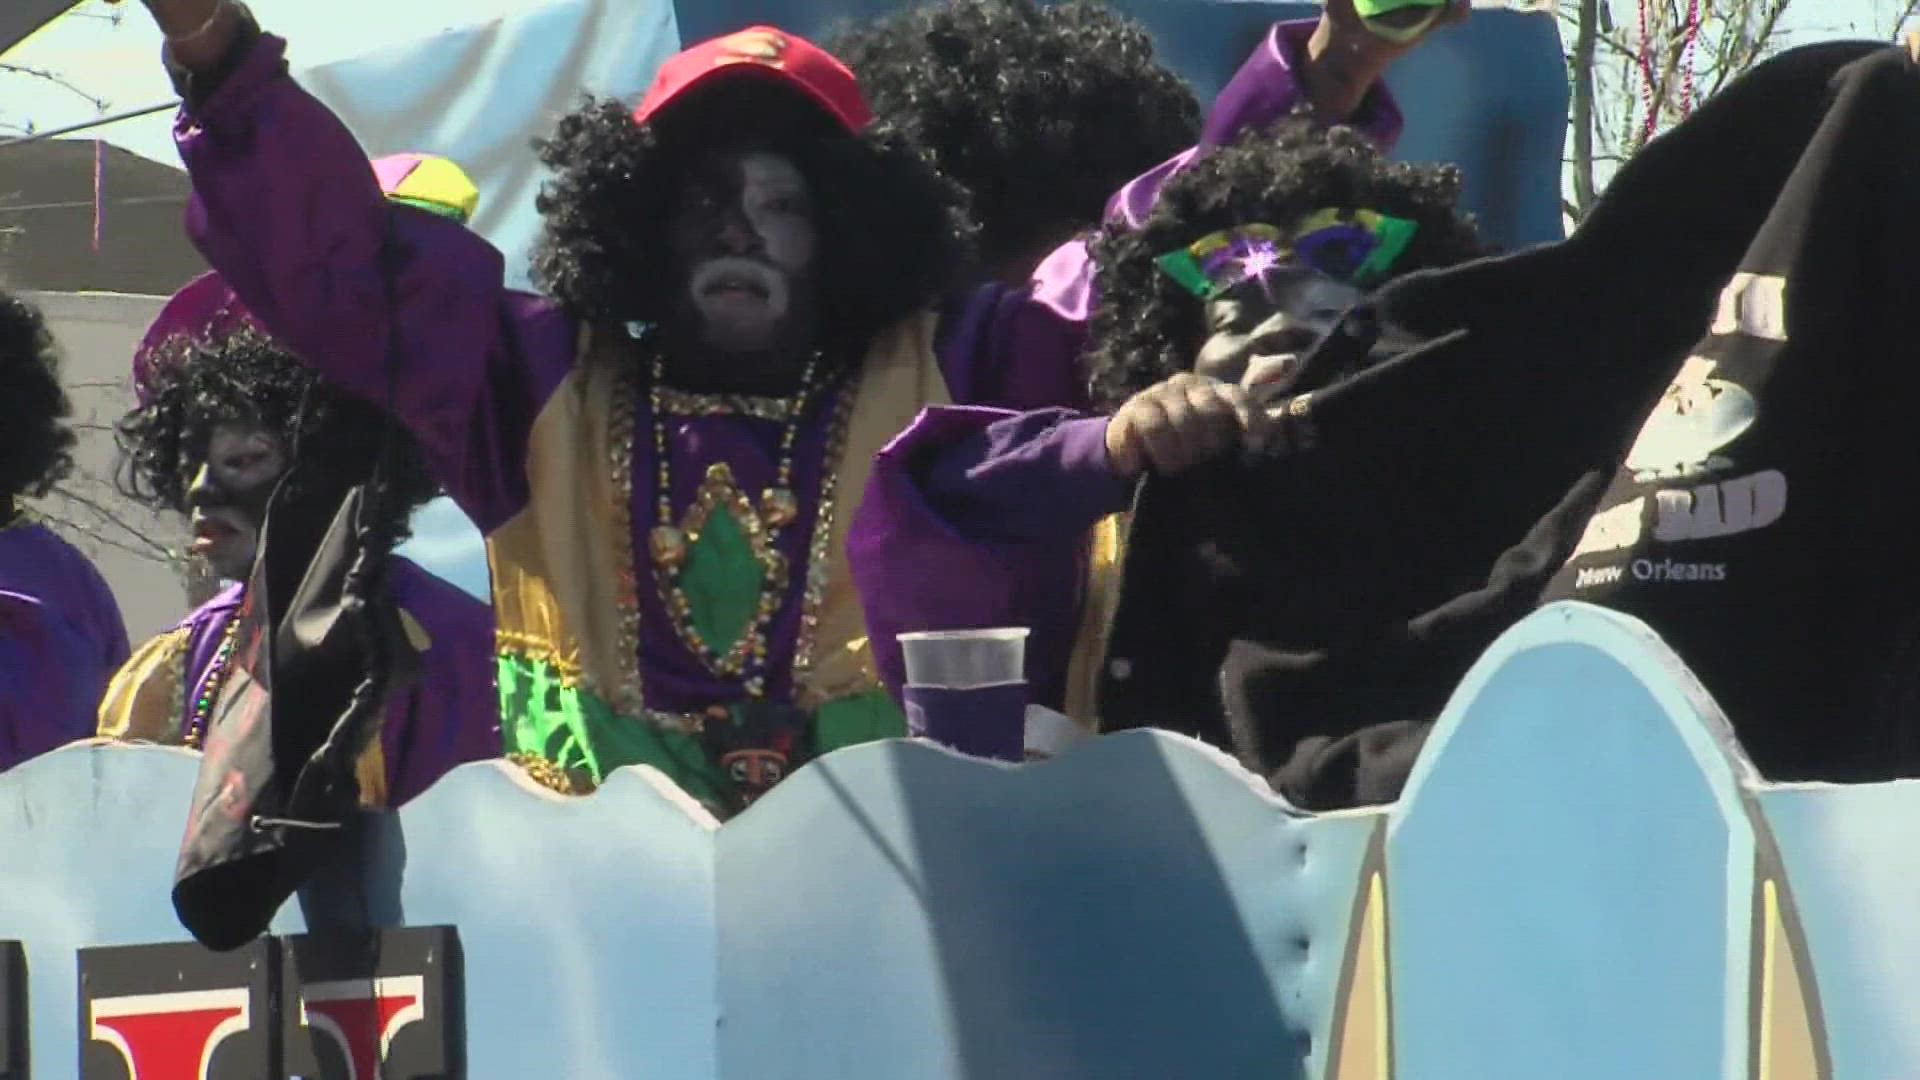 Down the street from Martin Luther King Jr. Boulevard in Uptown, on Jackson and Claiborne, is where the Zulu Krewe parade usual starts for Mardi Gras.